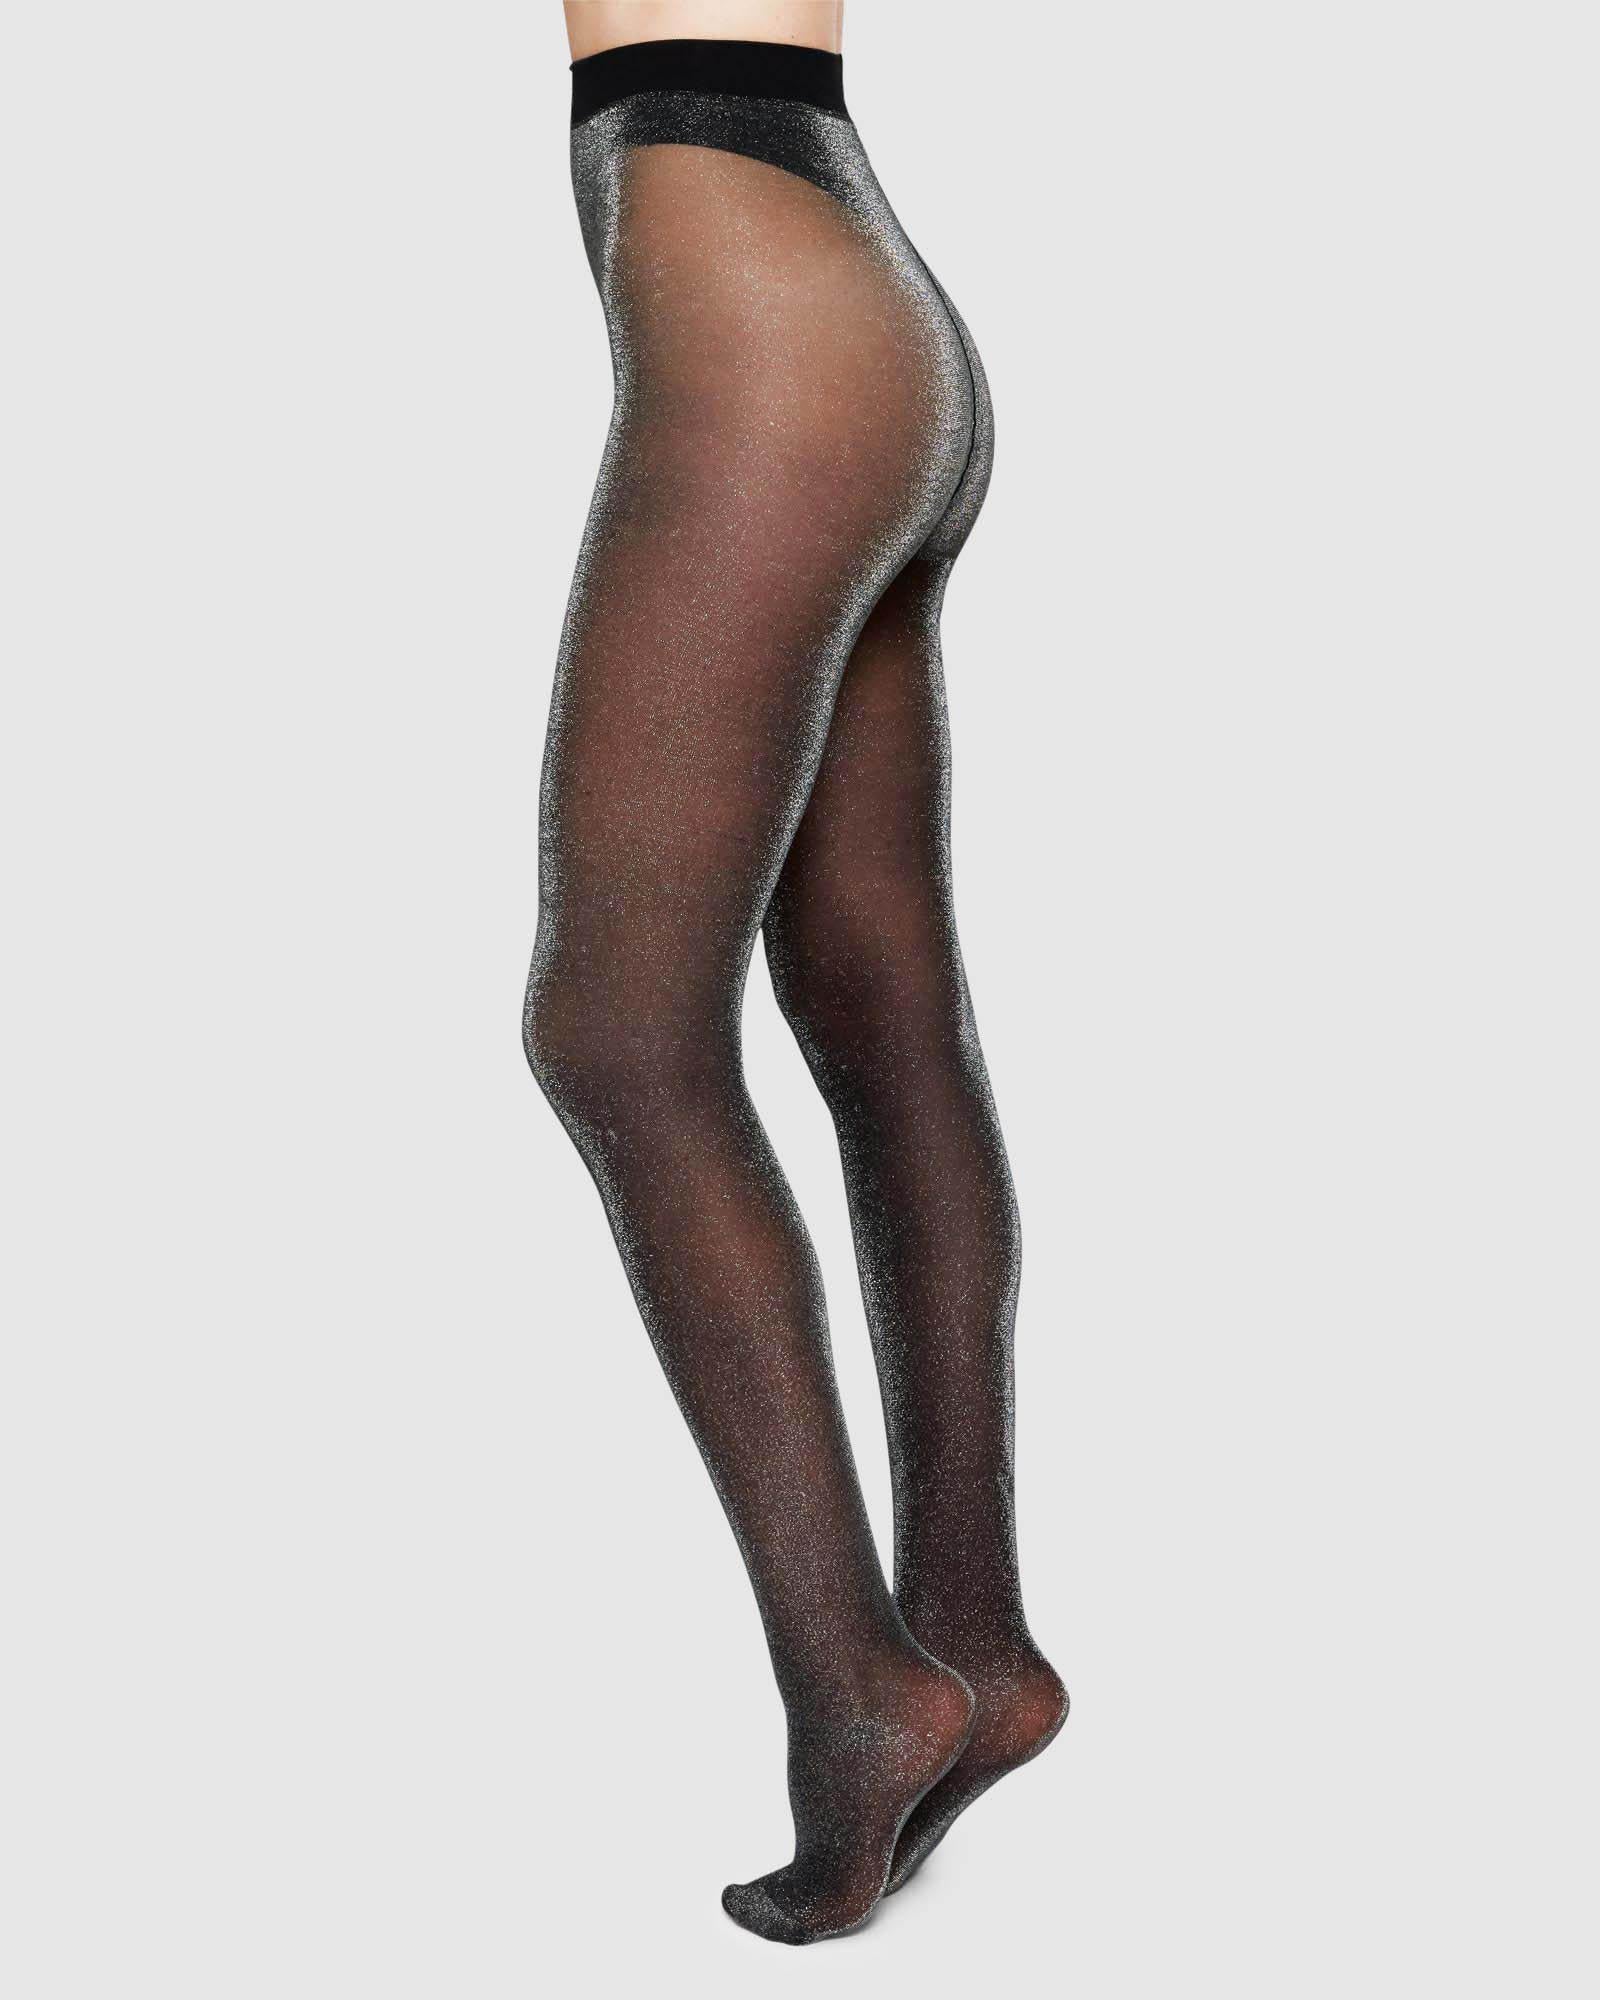 Tora Shimmery Tights Silver 20 den | Shop now - Swedish Stockings